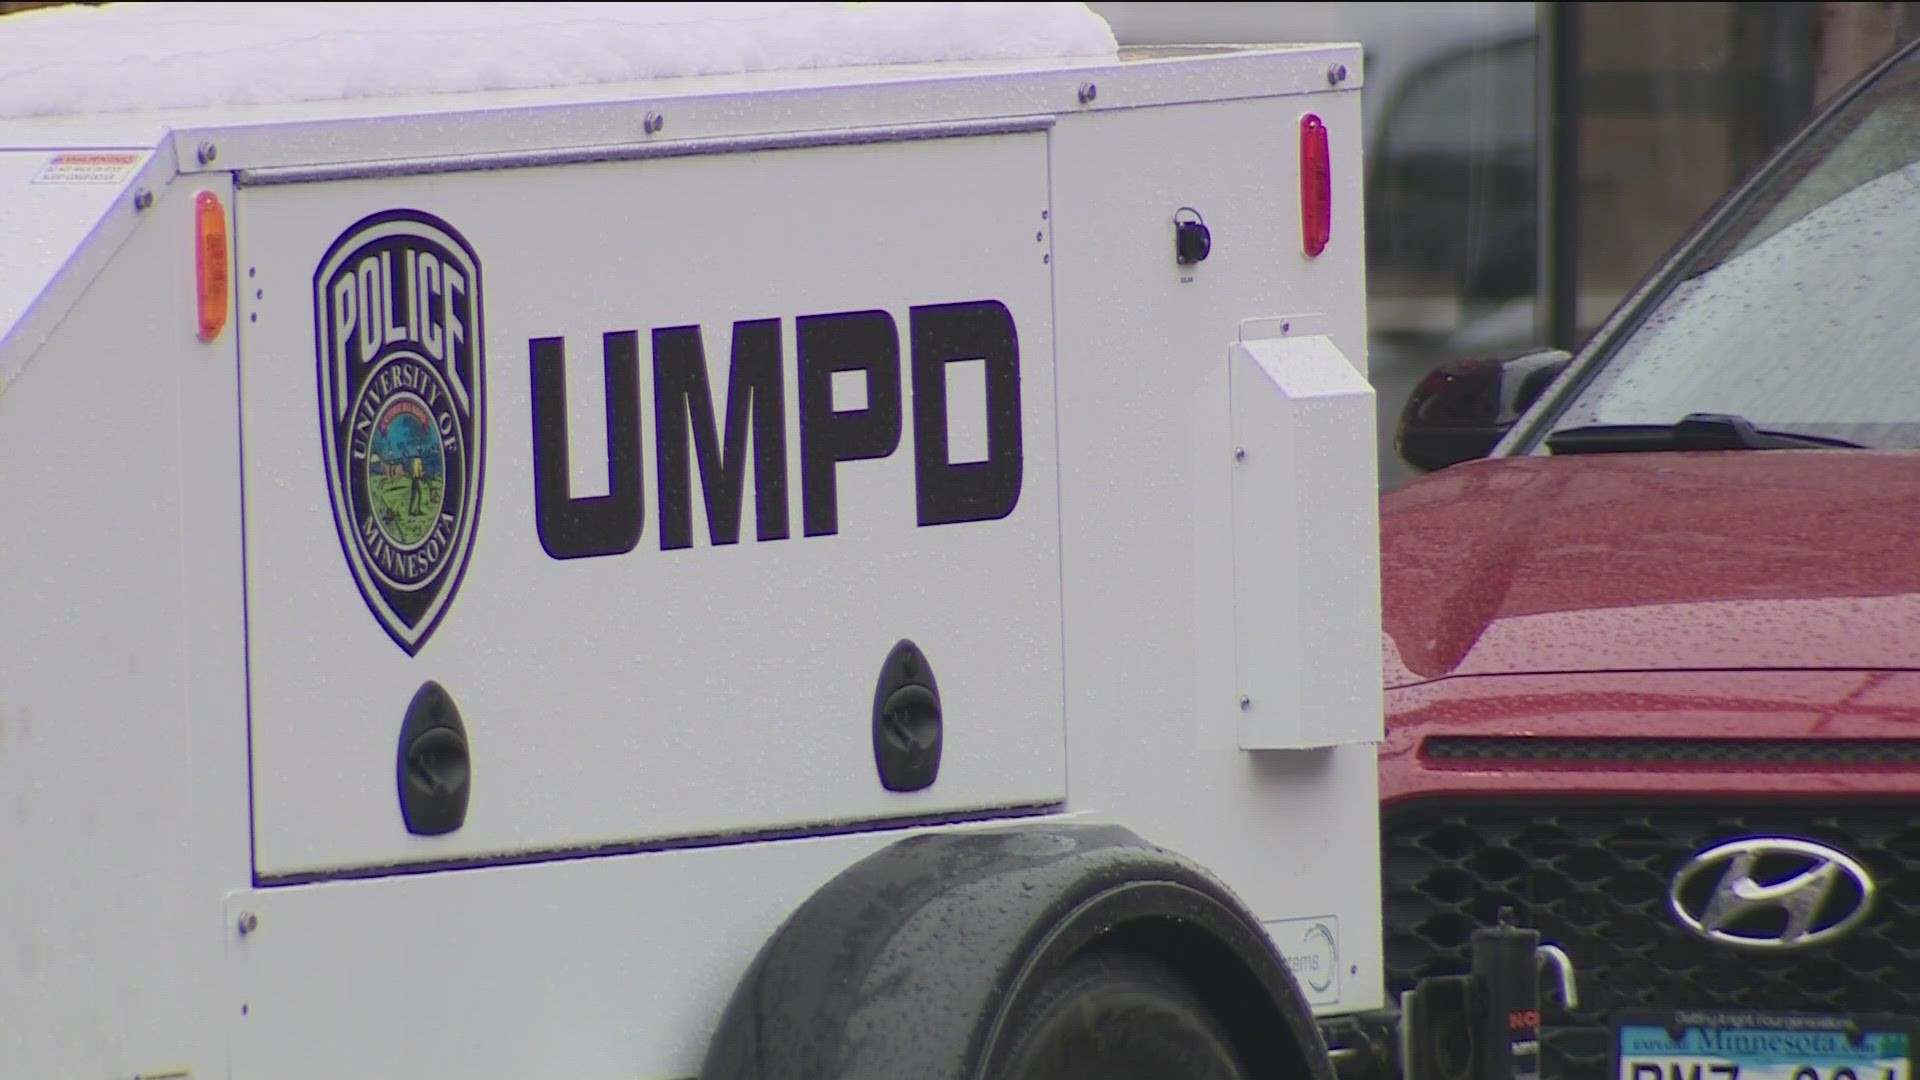 UMPD will take both emergency and non-emergency calls from MPD, which is experiencing major staffing shortages.